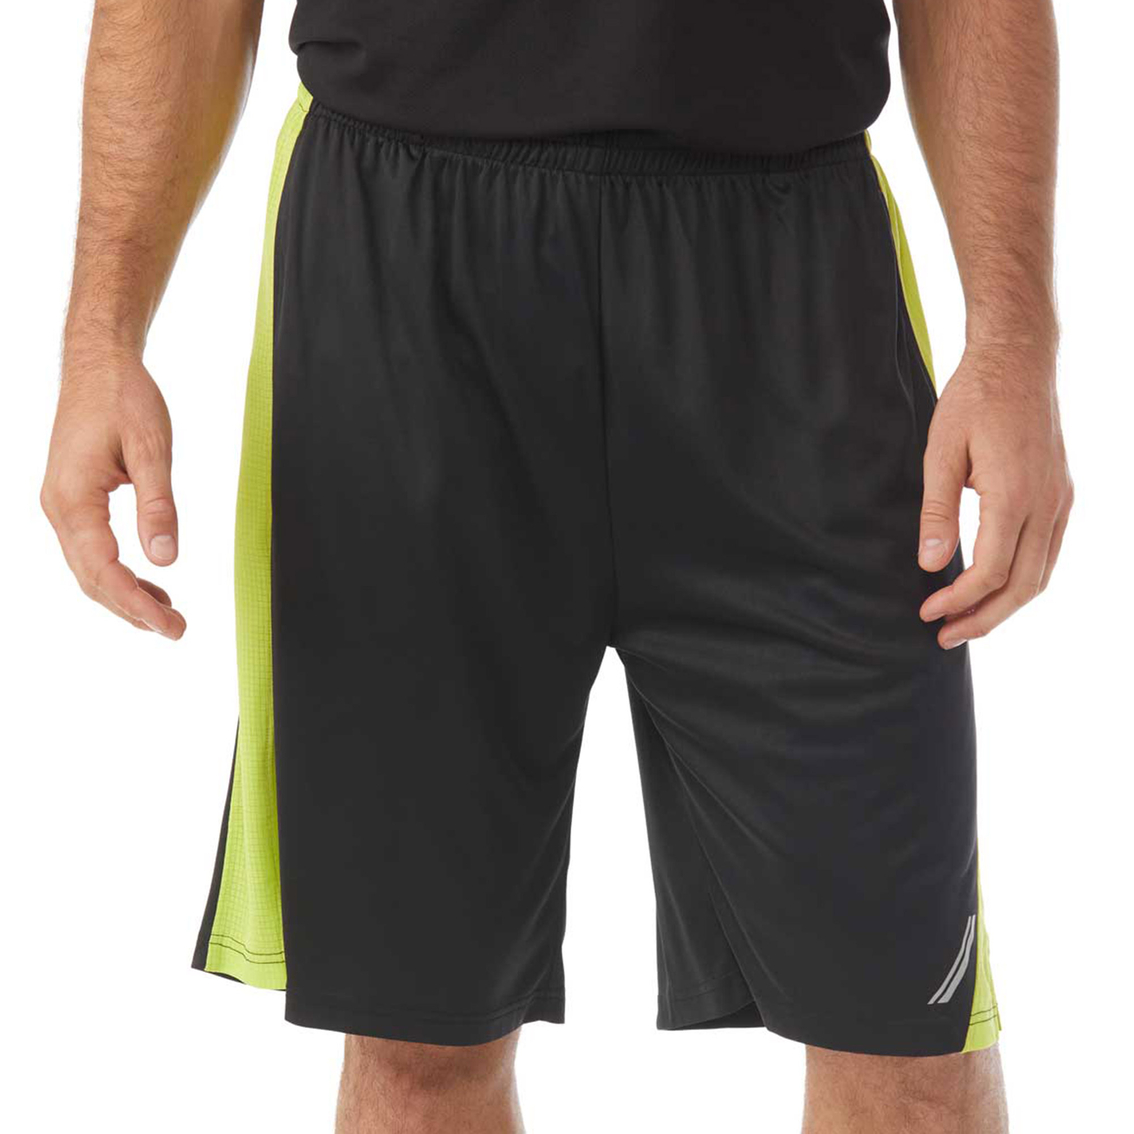 Pbx Pro Polyester Shorts | Gifts Under $25 | Father's Day Shop | Shop ...